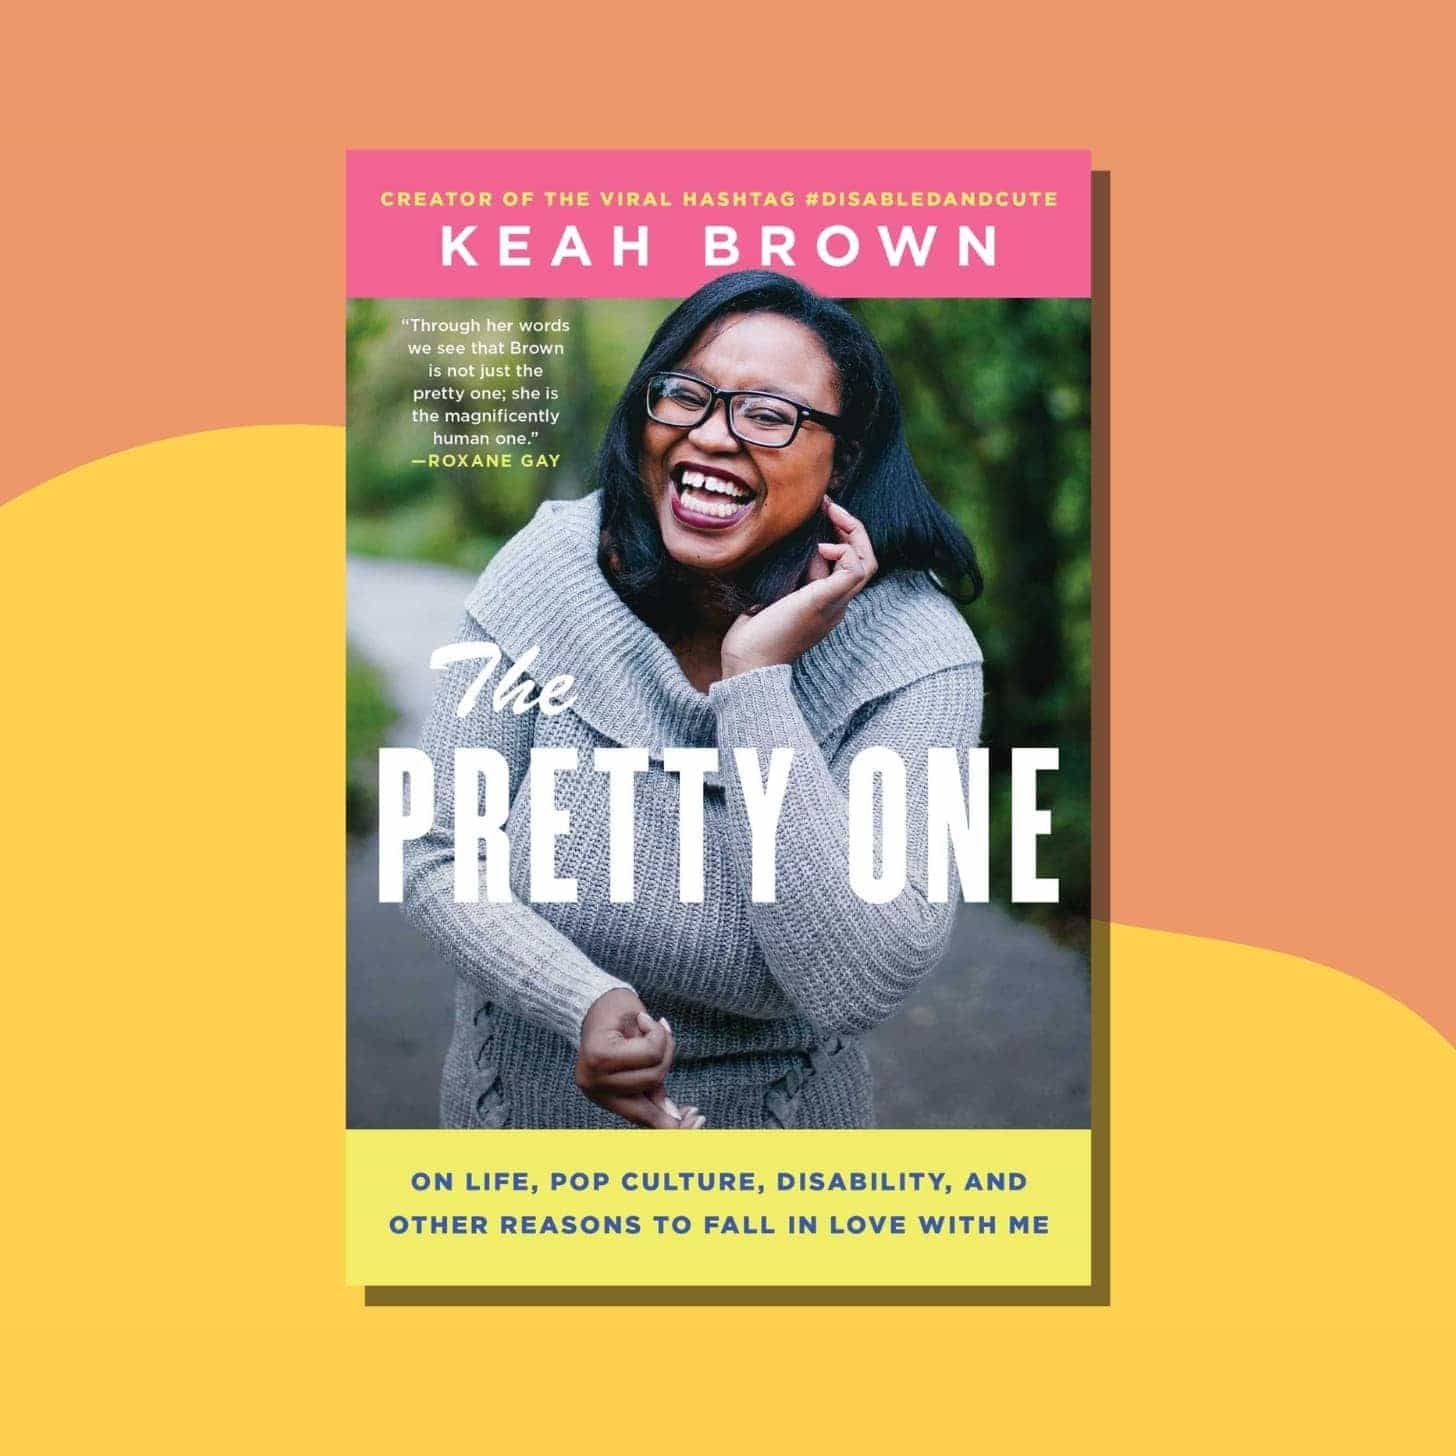 “The Pretty One: On Life, Pop Culture, Disability, and Other Reasons to Fall in Love with Me” by Keah Brown - Cover has Keah, who has black skin and black hair and glasses, smiling in a sweater outdoors